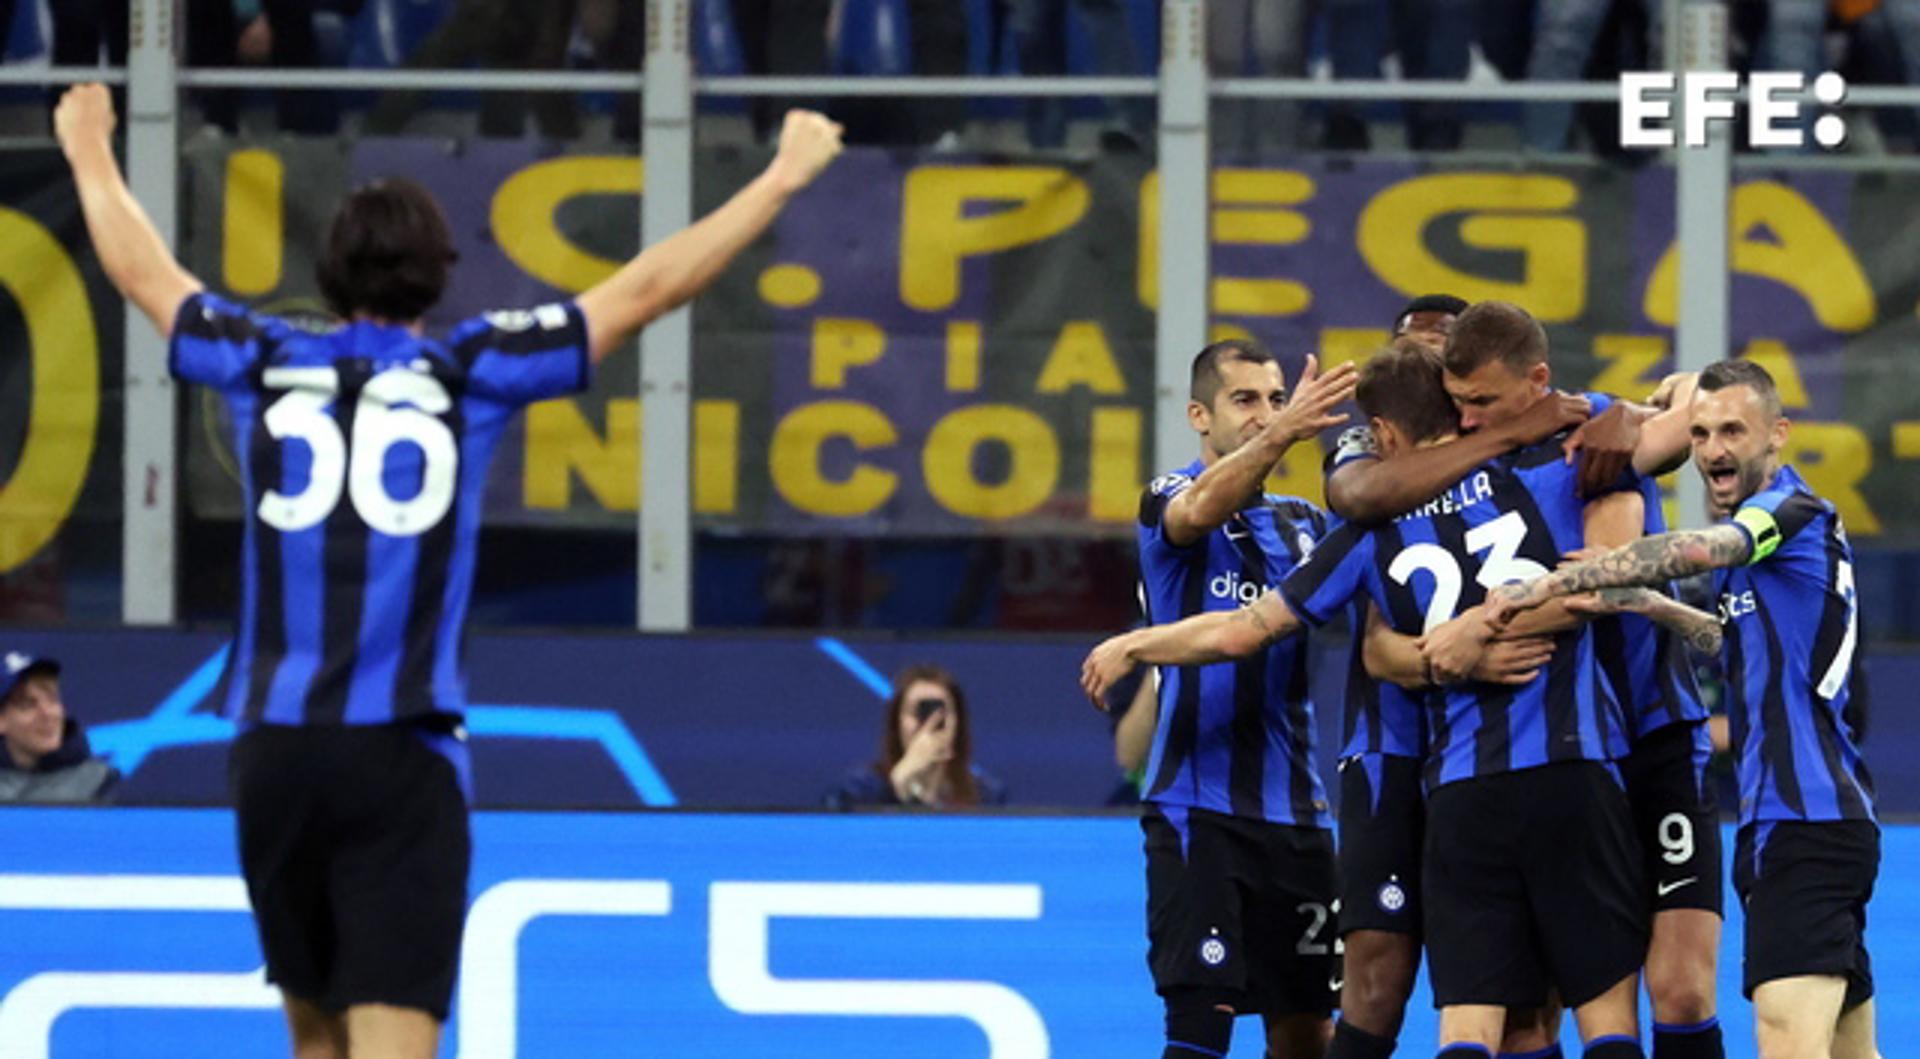 Inter Milan's Nicolo Barella celebrates with teammates after scoring against Benfica during the UEFA Champions League quarterfinal second leg in Milan, Italy, on 19 April 2023. EFE/EPA/MATTEO BAZZI
